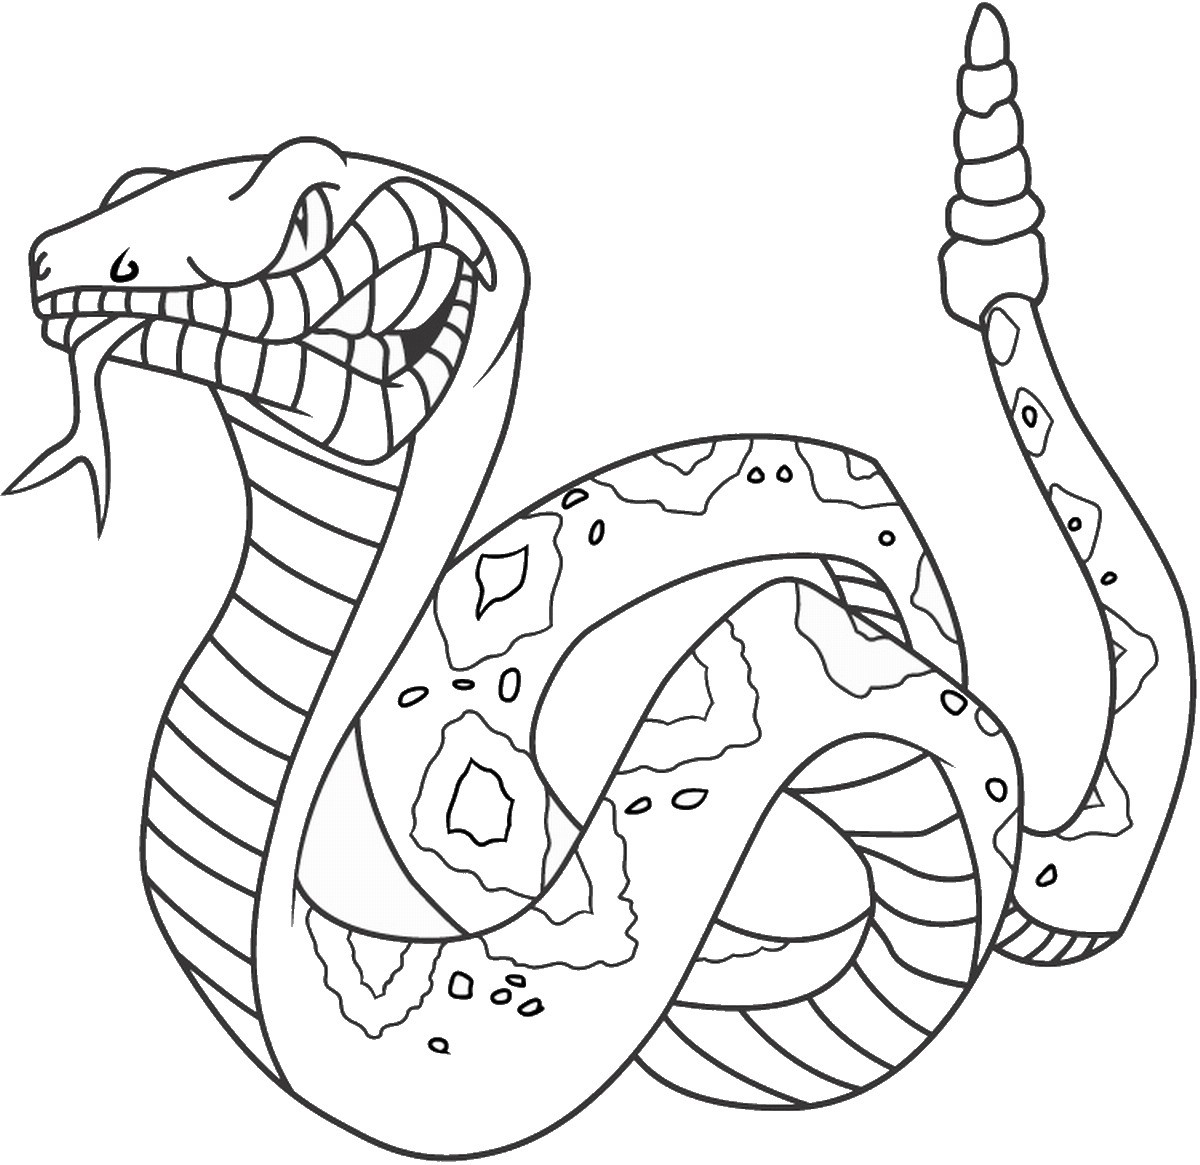 Snake Coloring Pages Printable
 Snake Coloring Pages